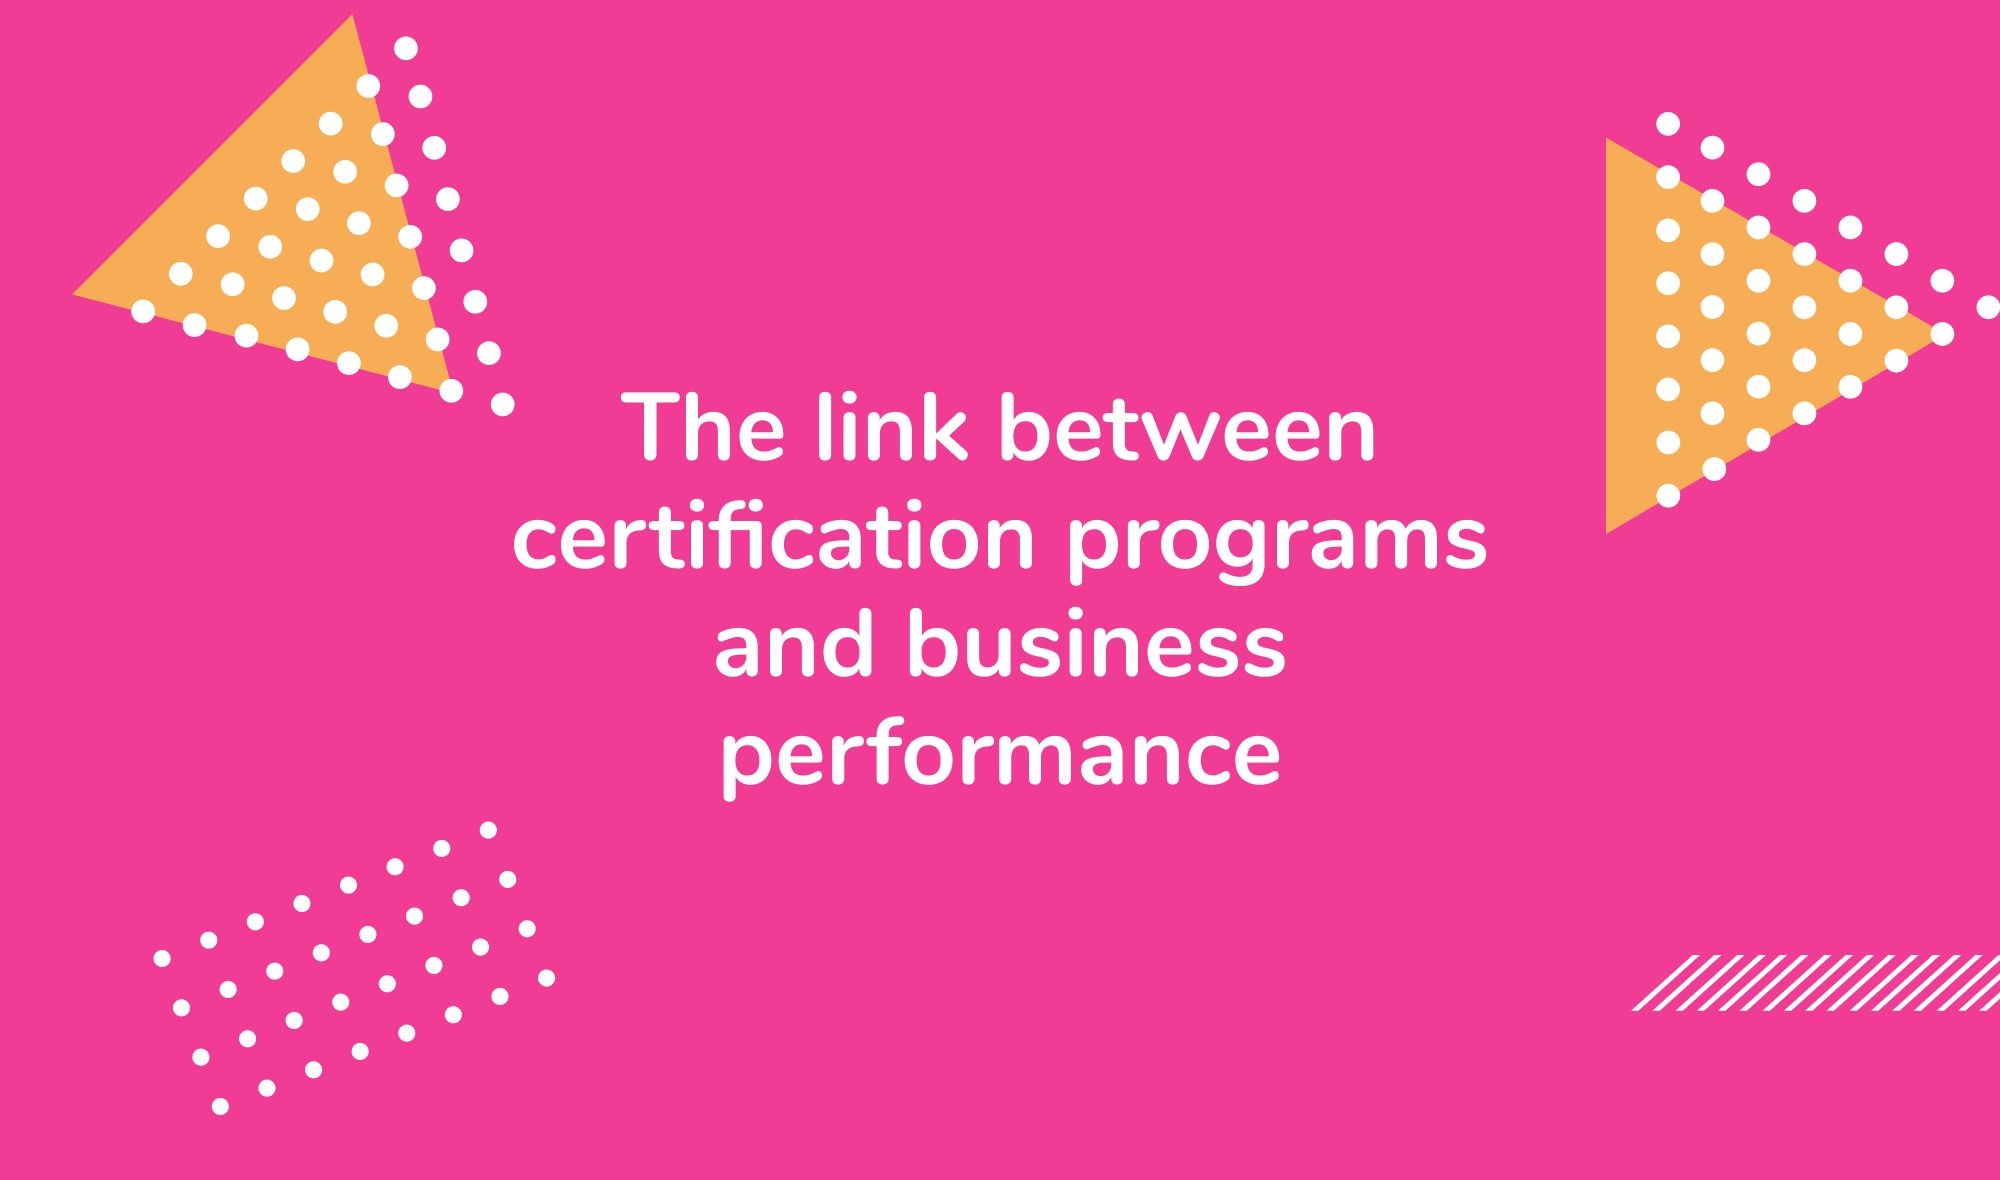 The link between certification programs and business performance